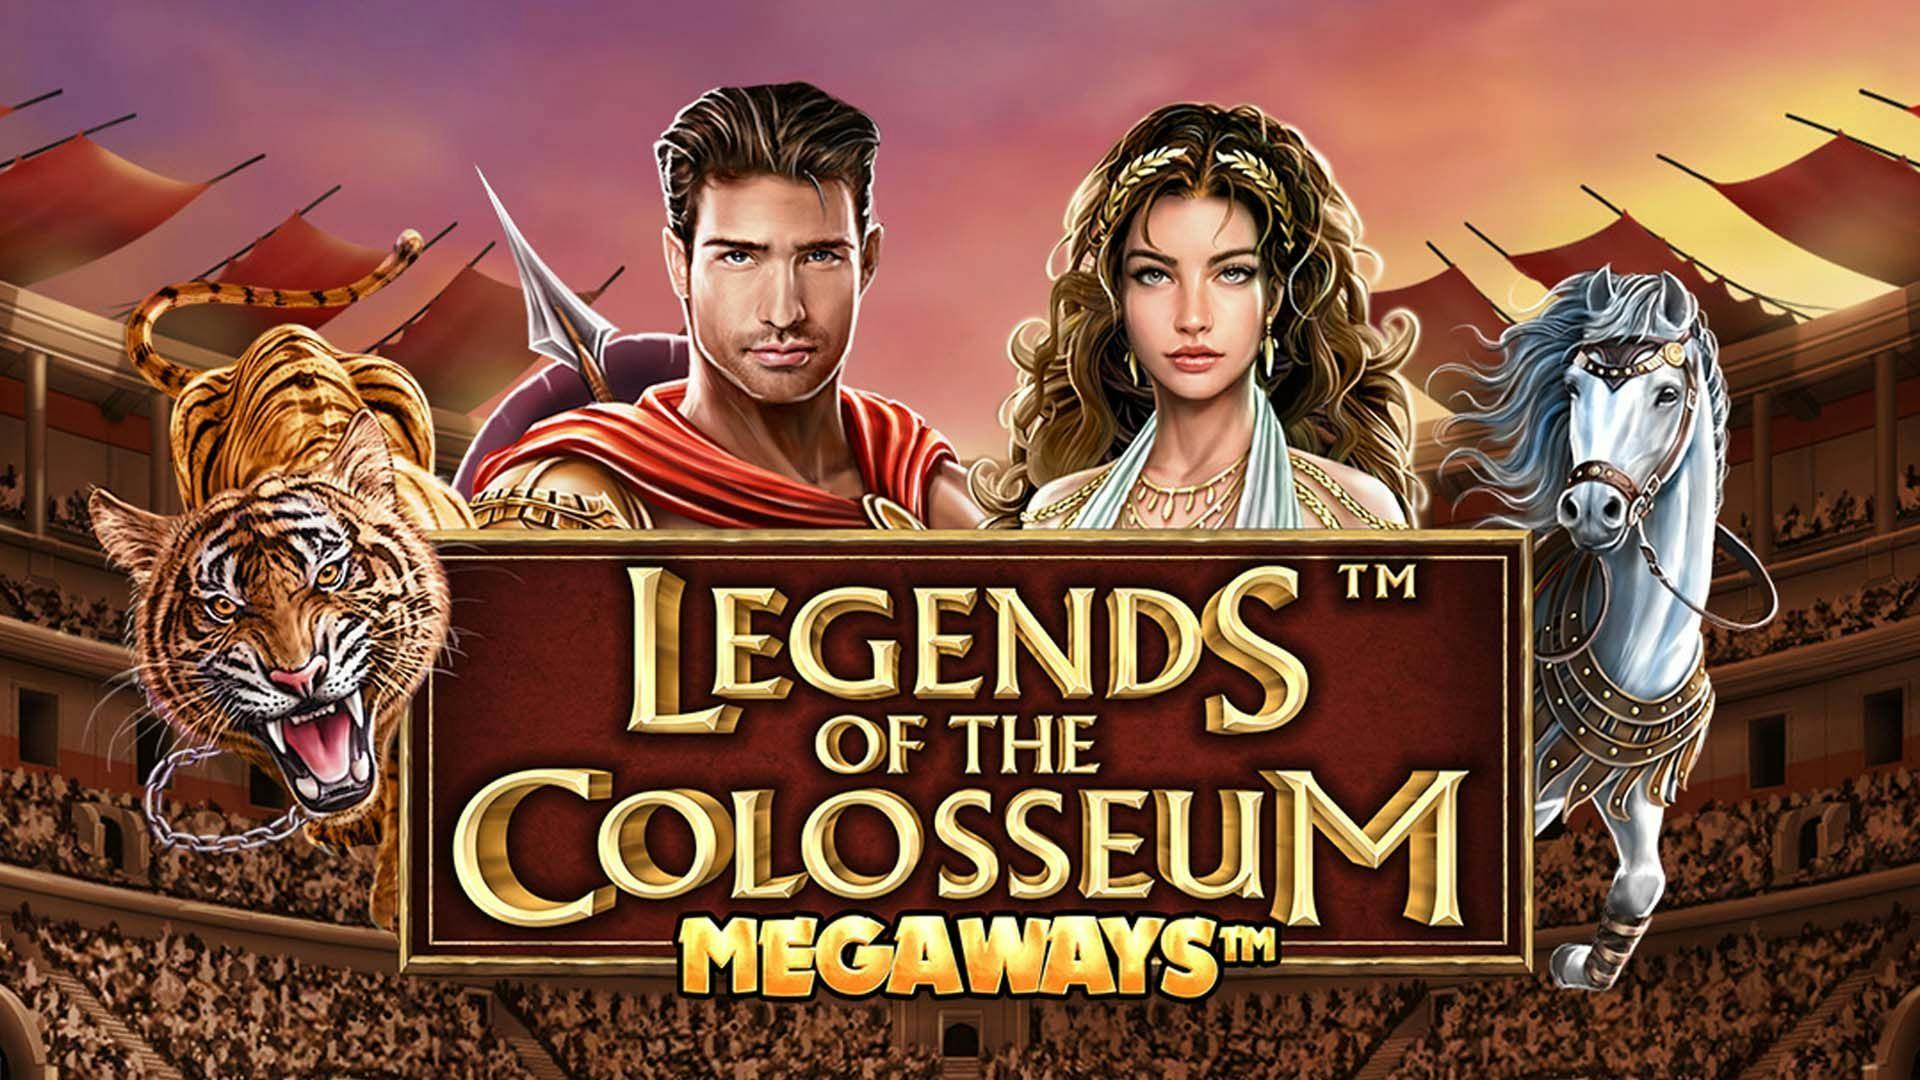 Legends Of The Colosseum Megaways Slot Machine Online Free Game Play